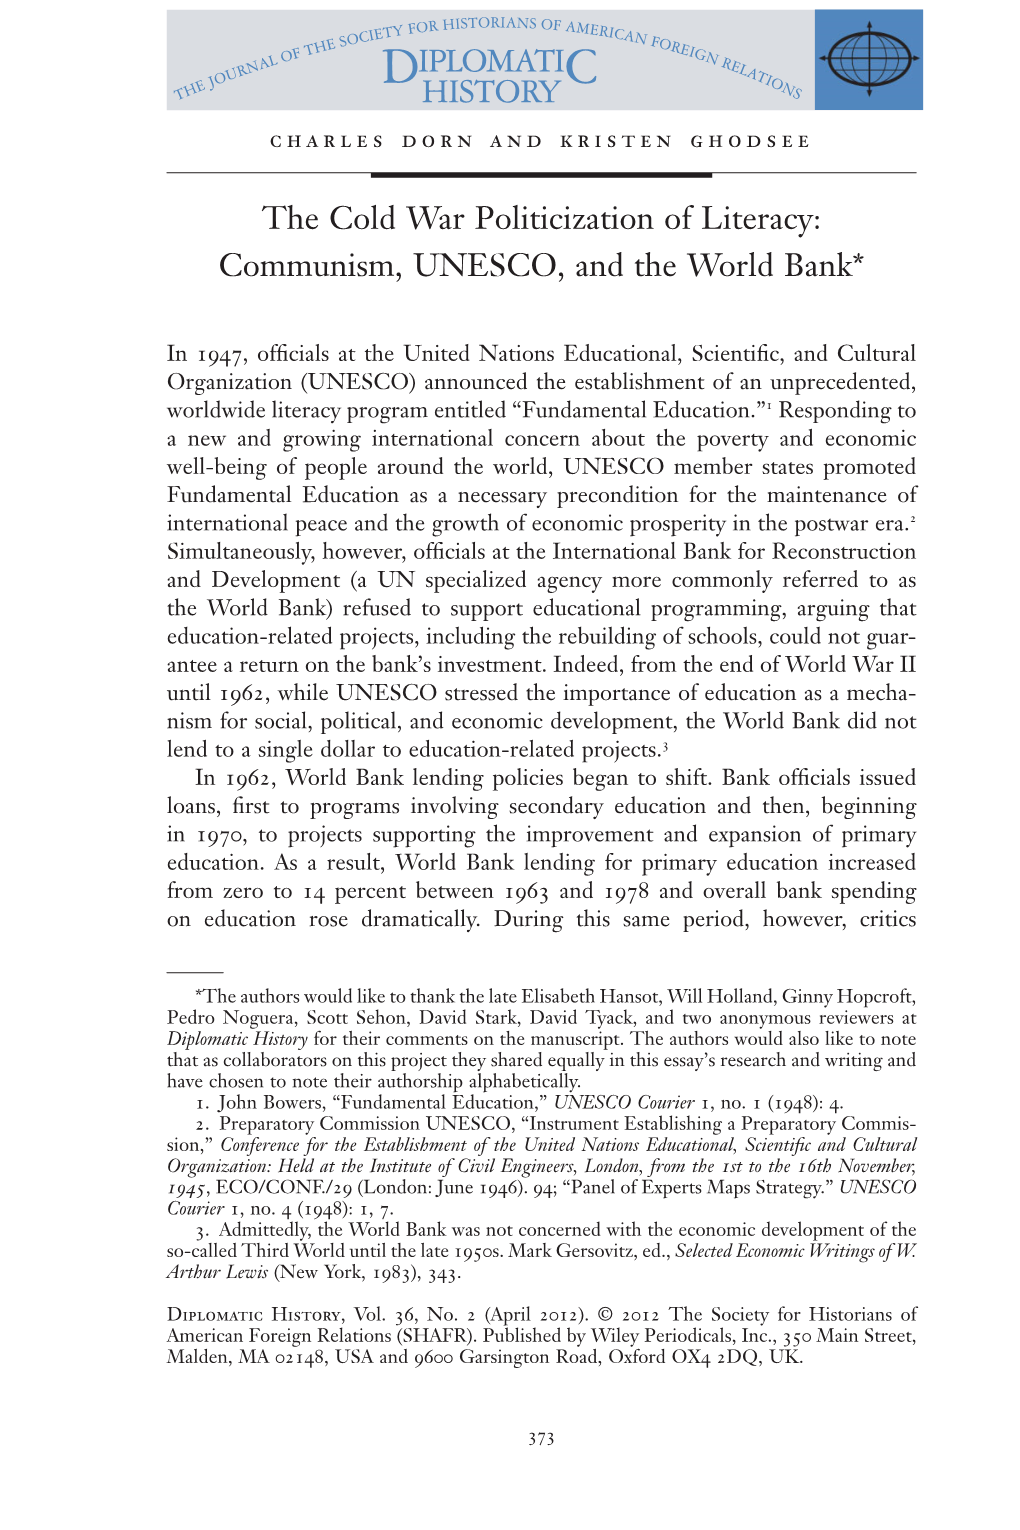 The Cold War Politicization of Literacy: Communism, UNESCO, and the World Bank*